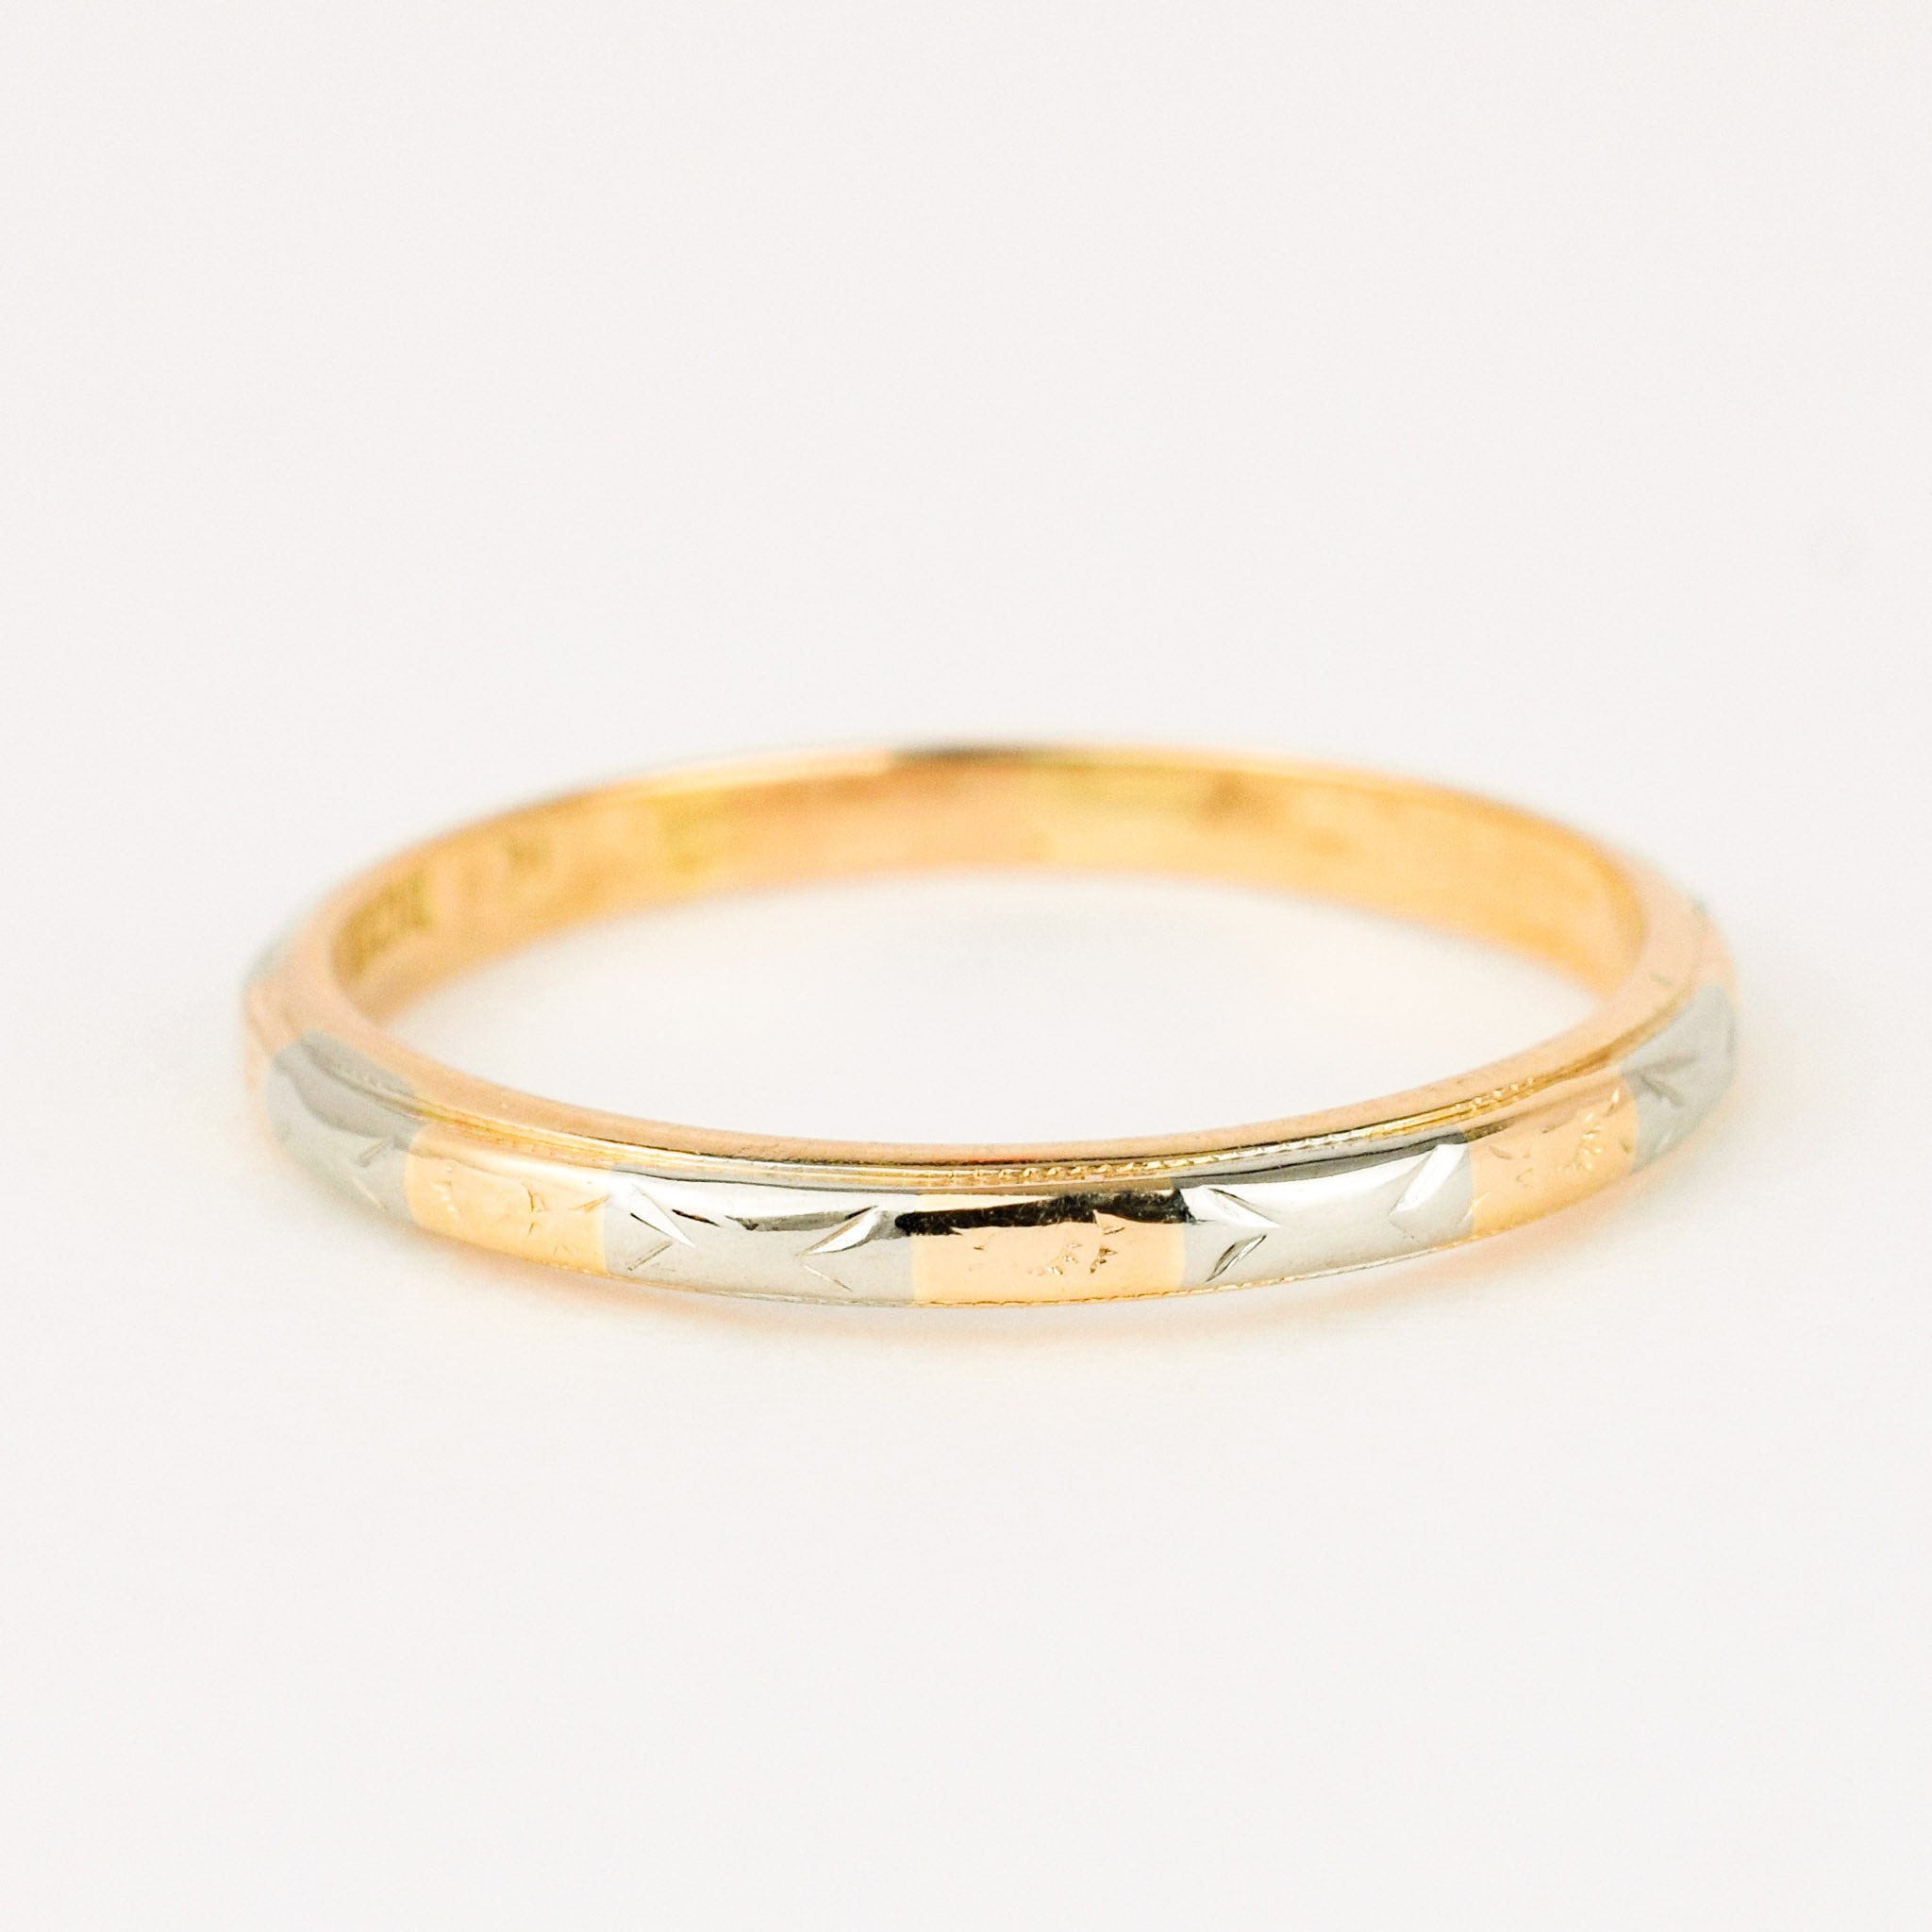 vintage gold intricate two-toned wedding bandvintage gold intricate two-toned wedding band